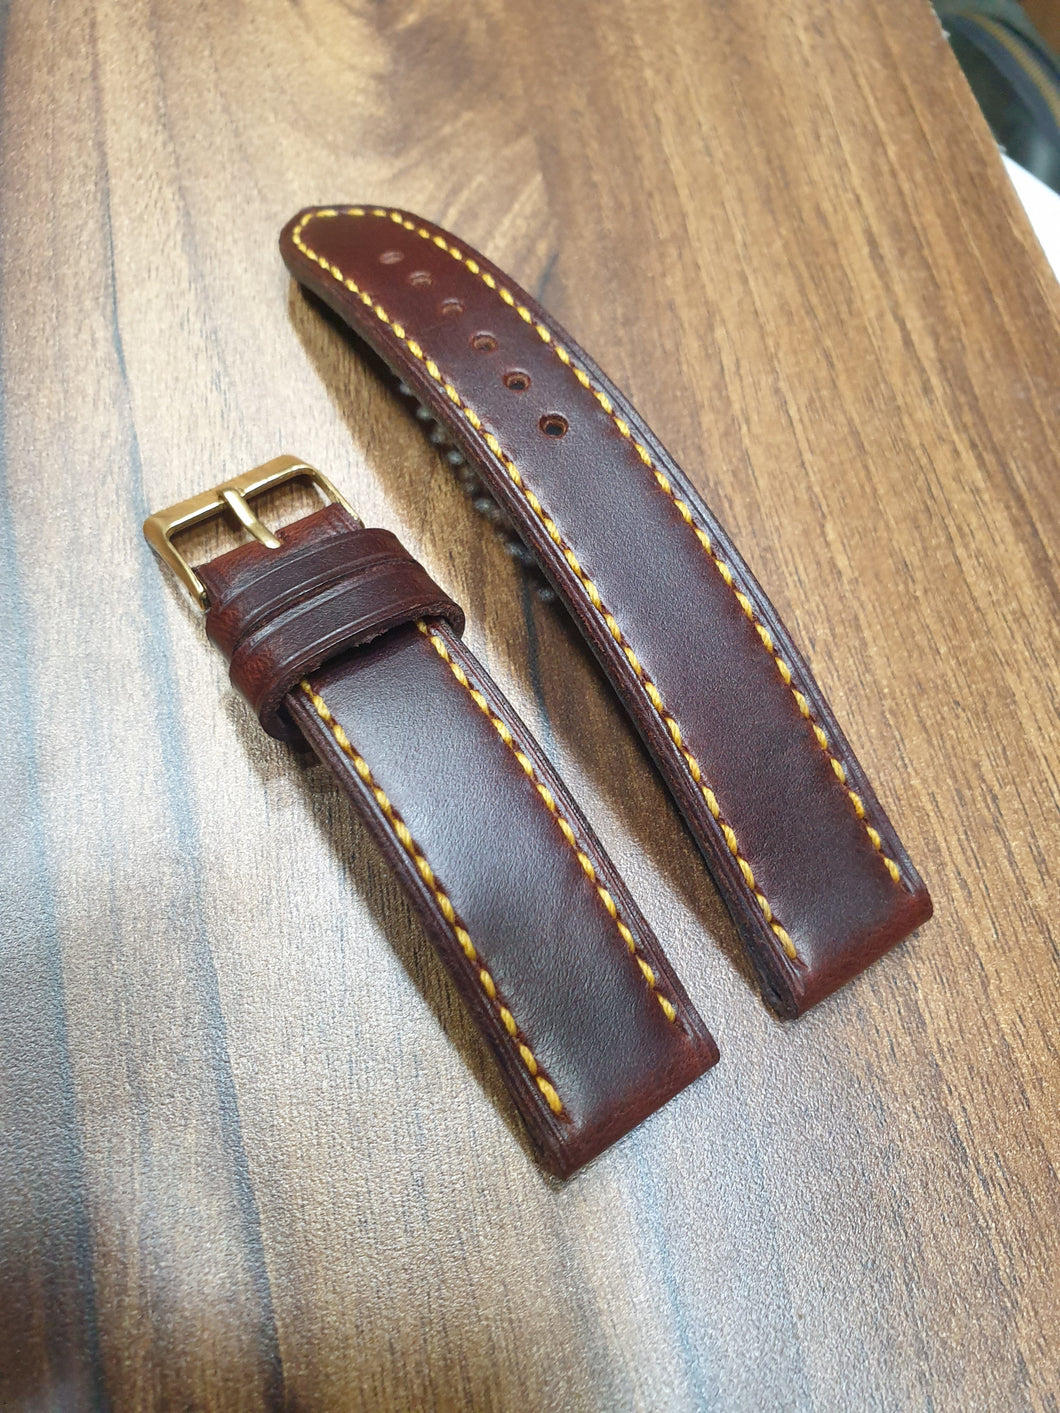 Indianleathercraft 18mm Handmade cherry red leather strap